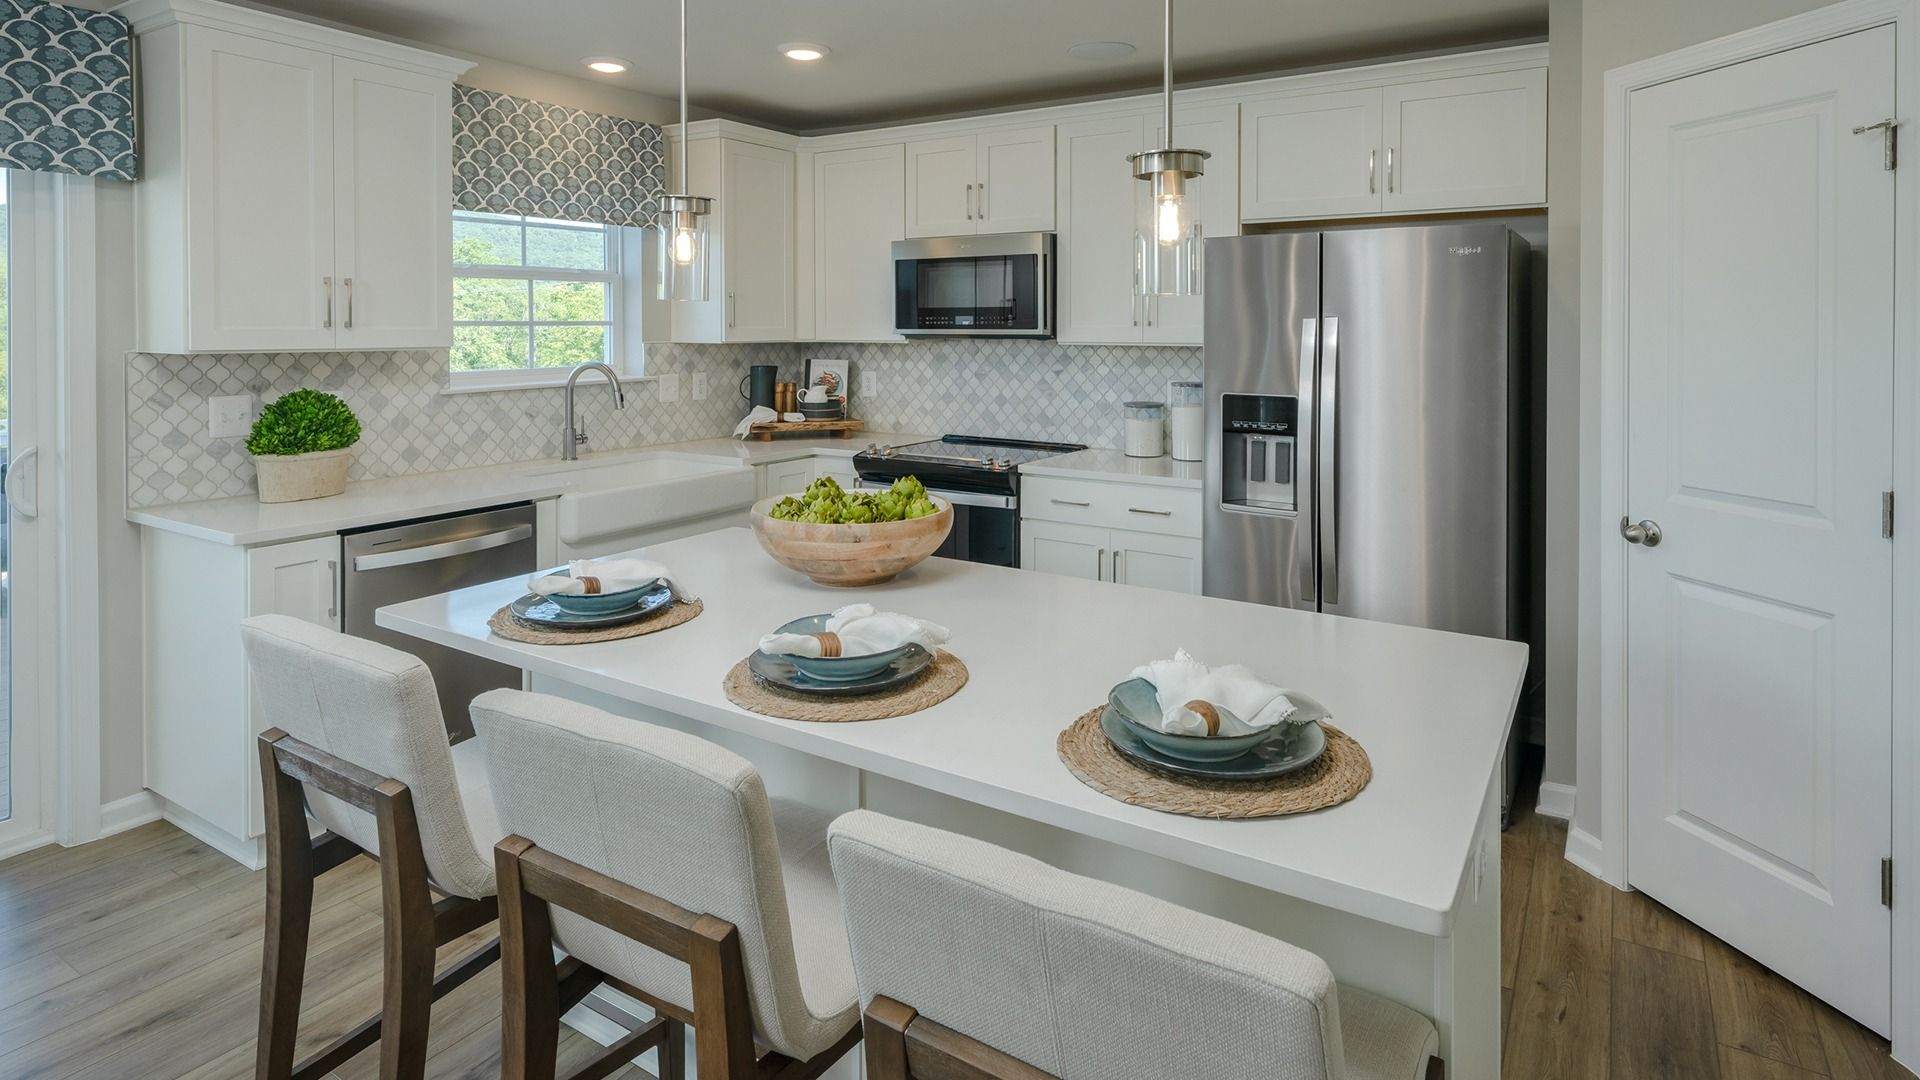 Carnegie Kitchen:Island kitchen with white upper cabinets & gray lower cabinets, white counters, stainless appliances, large window above sink